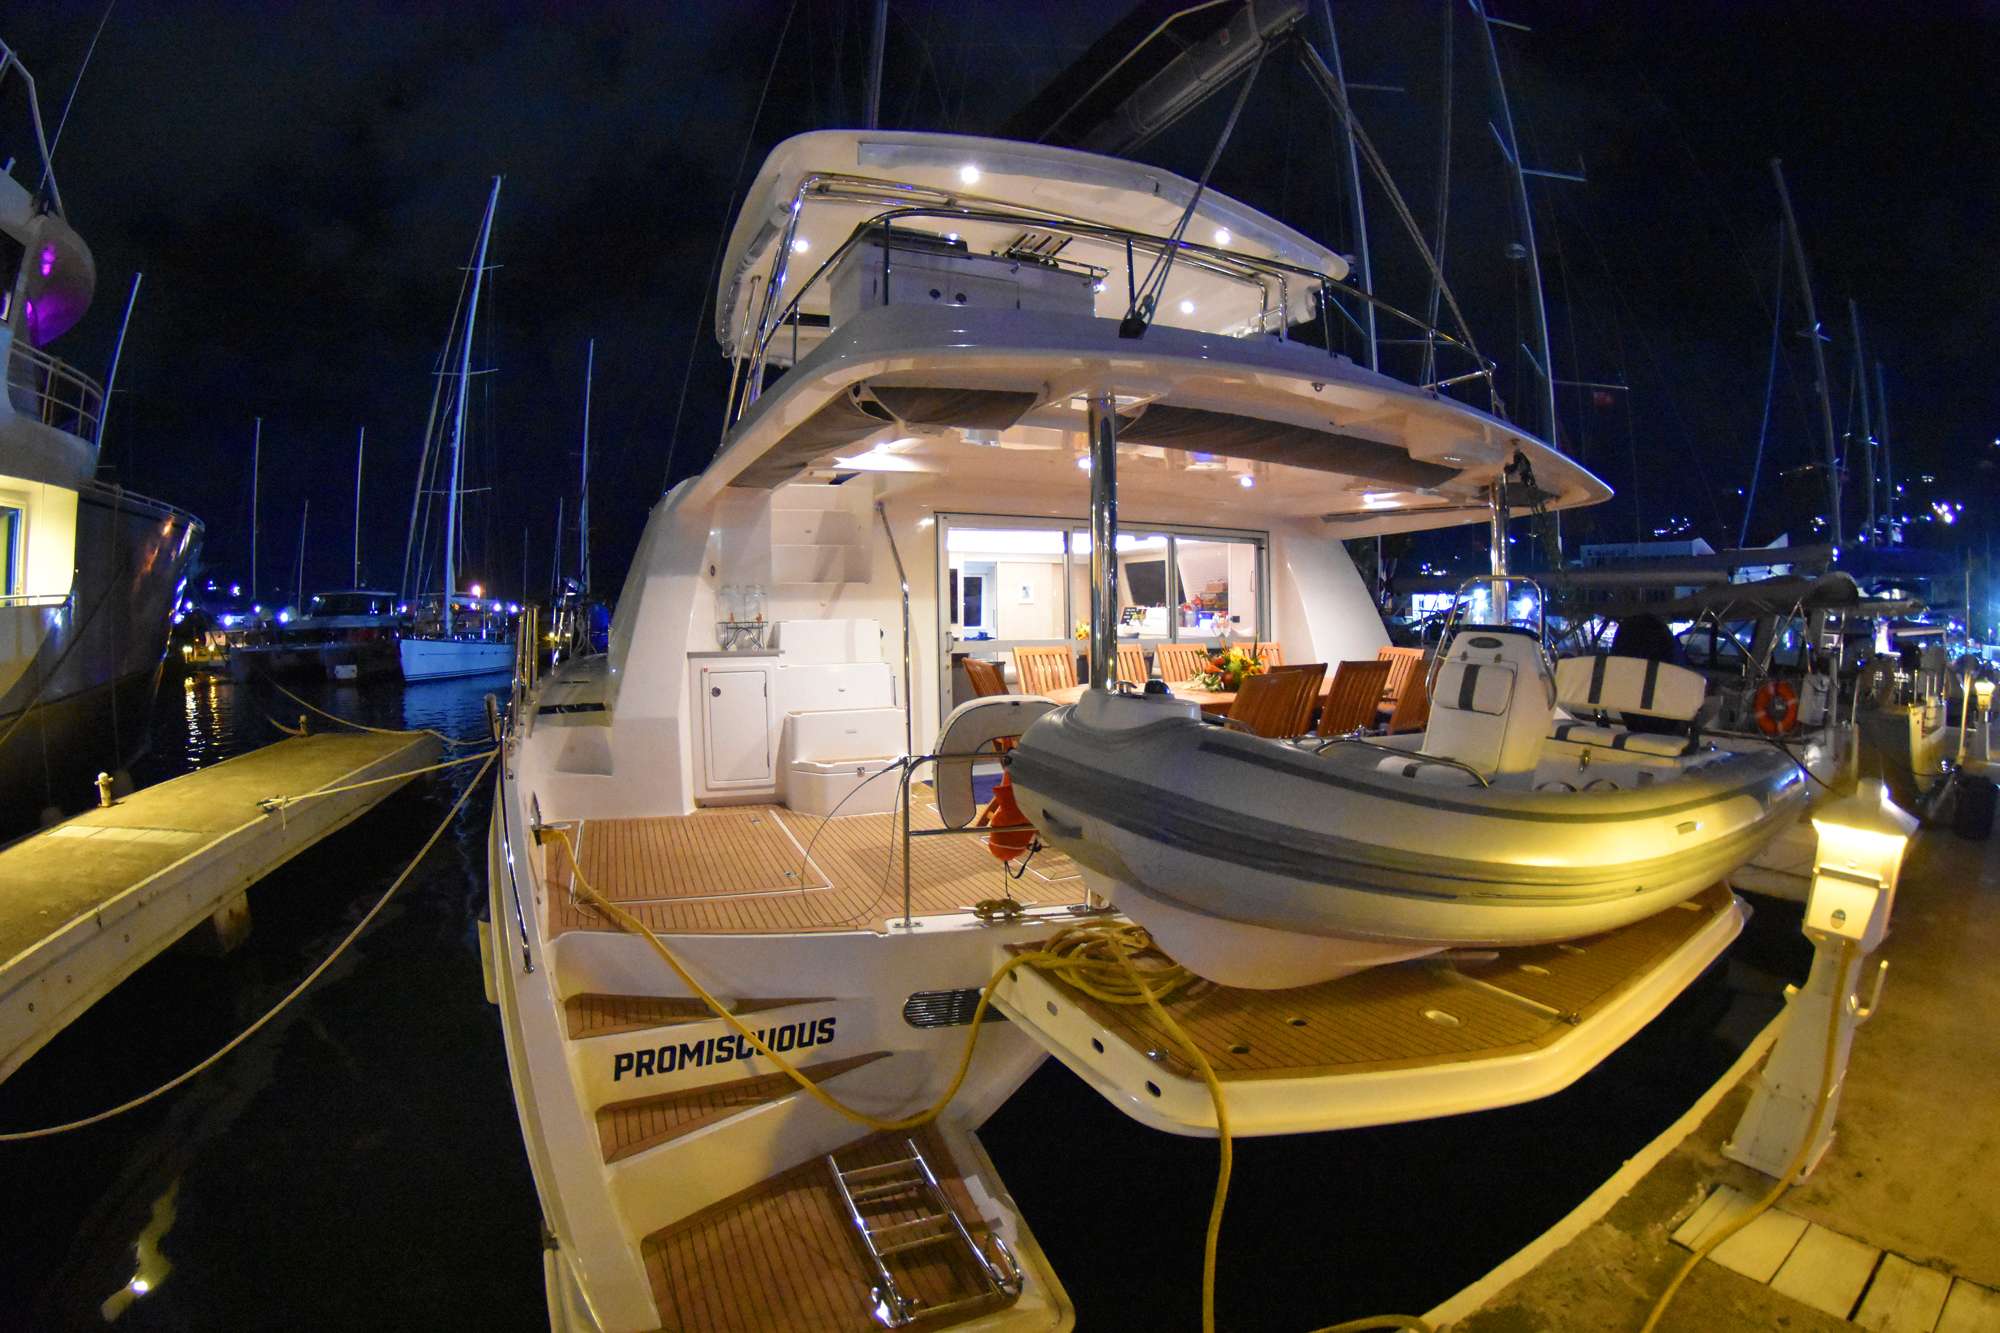 PROMISCUOUS Yacht Charter - Promiscuous Aft at night